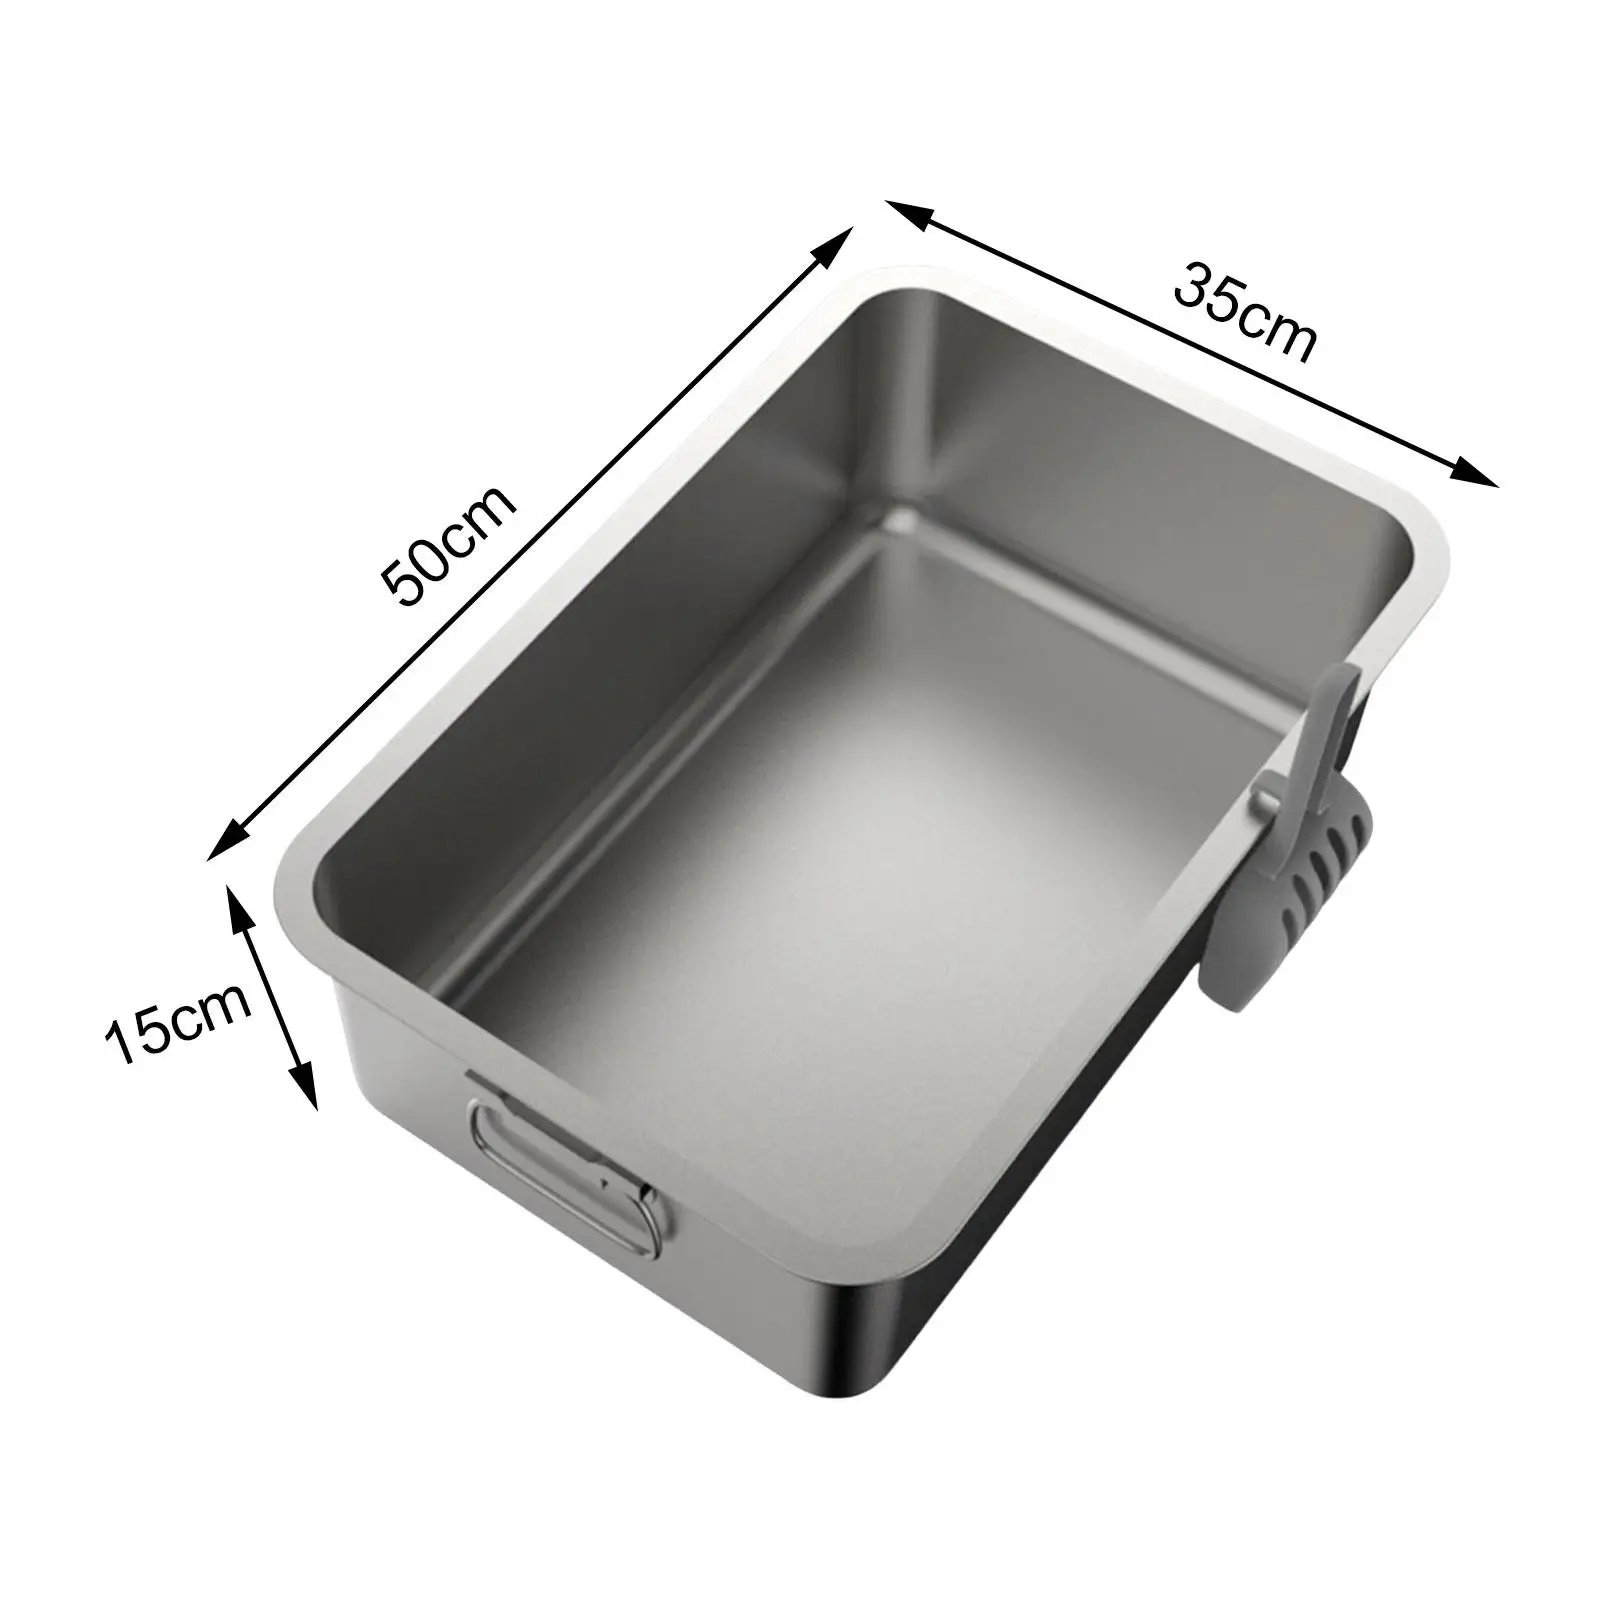 Cat Litter Boxes Indoor Cats Stainless Steel Semi Enclosed with Shovel Durable Pet Bedpan Cat Potty Toilet for Pet Accessories